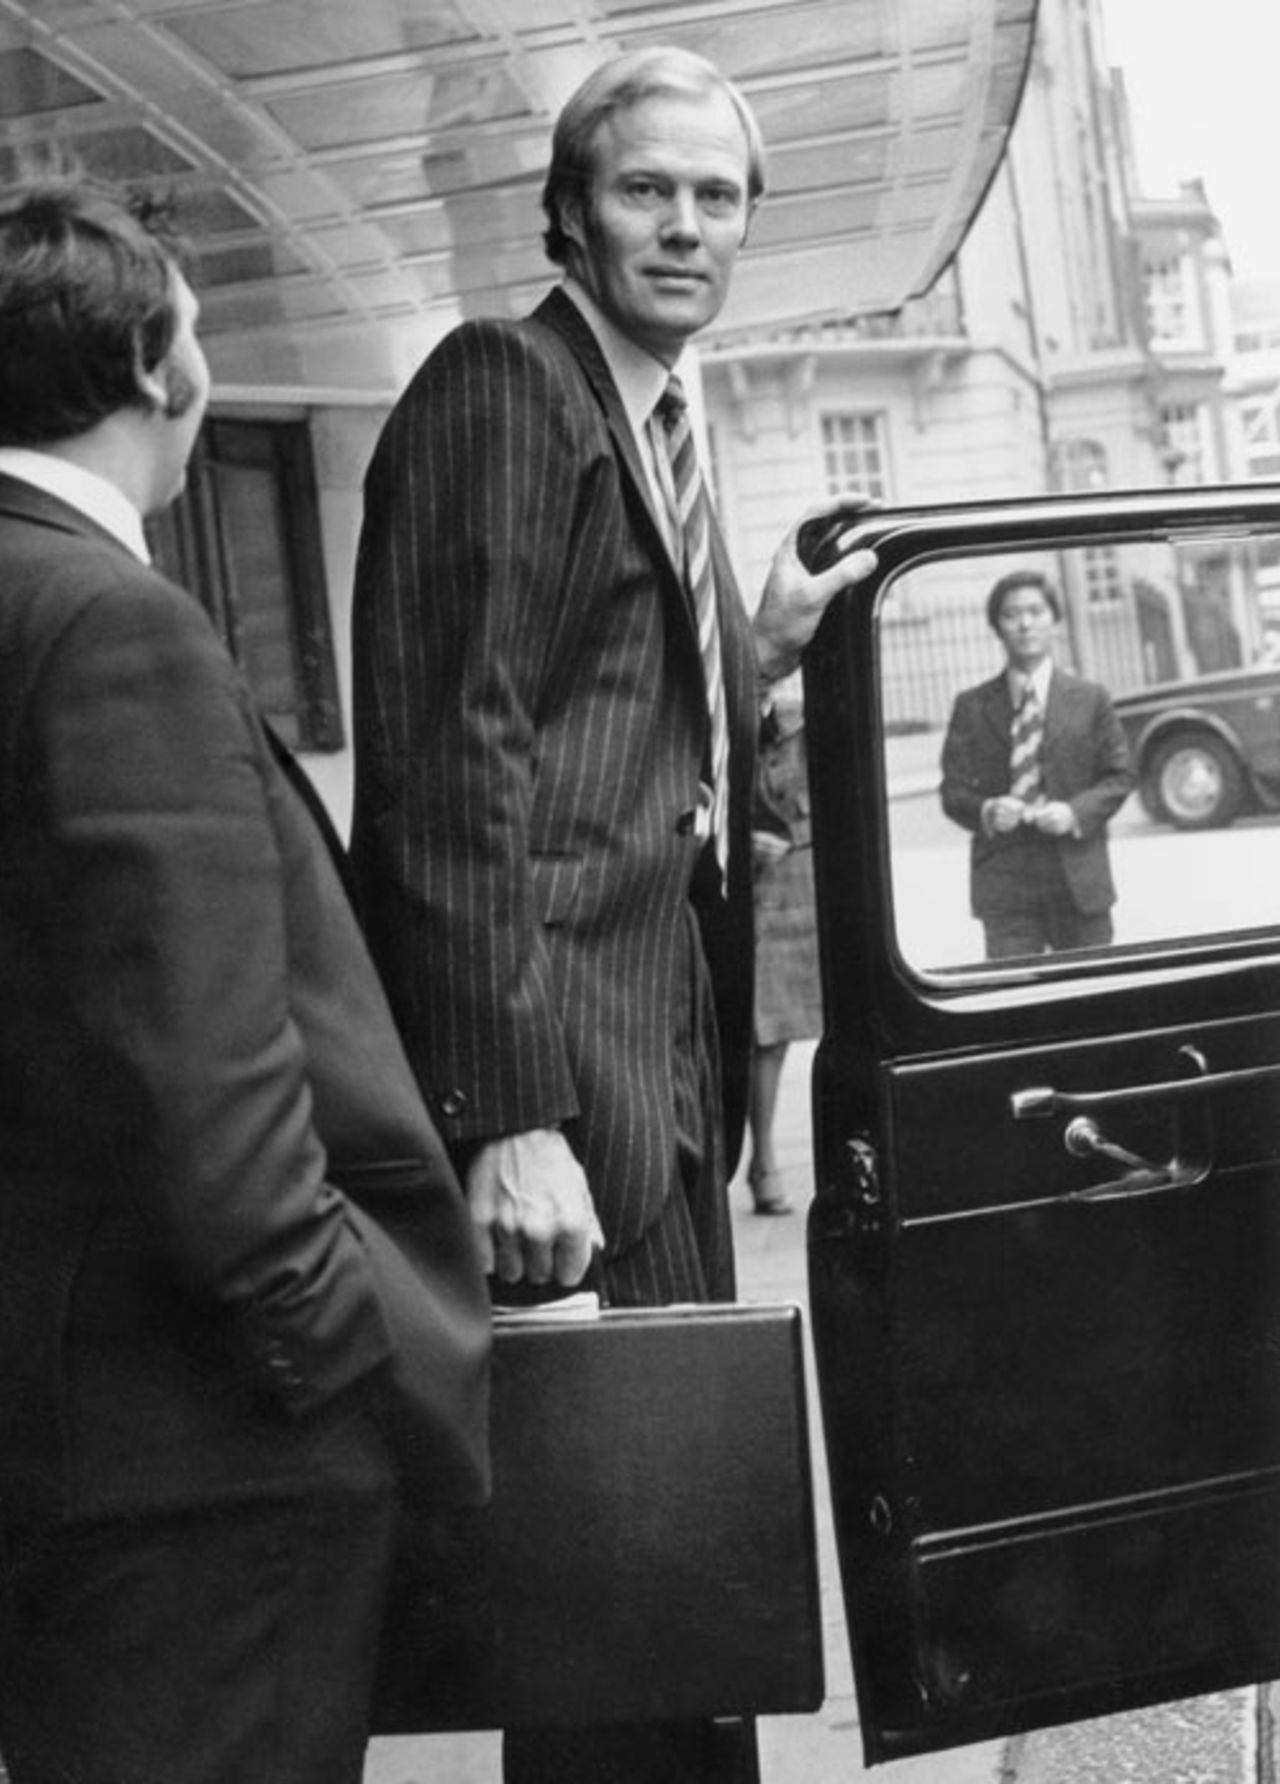 Tony Greig leaves the Dorchester Hotel, London, October 3, 1977